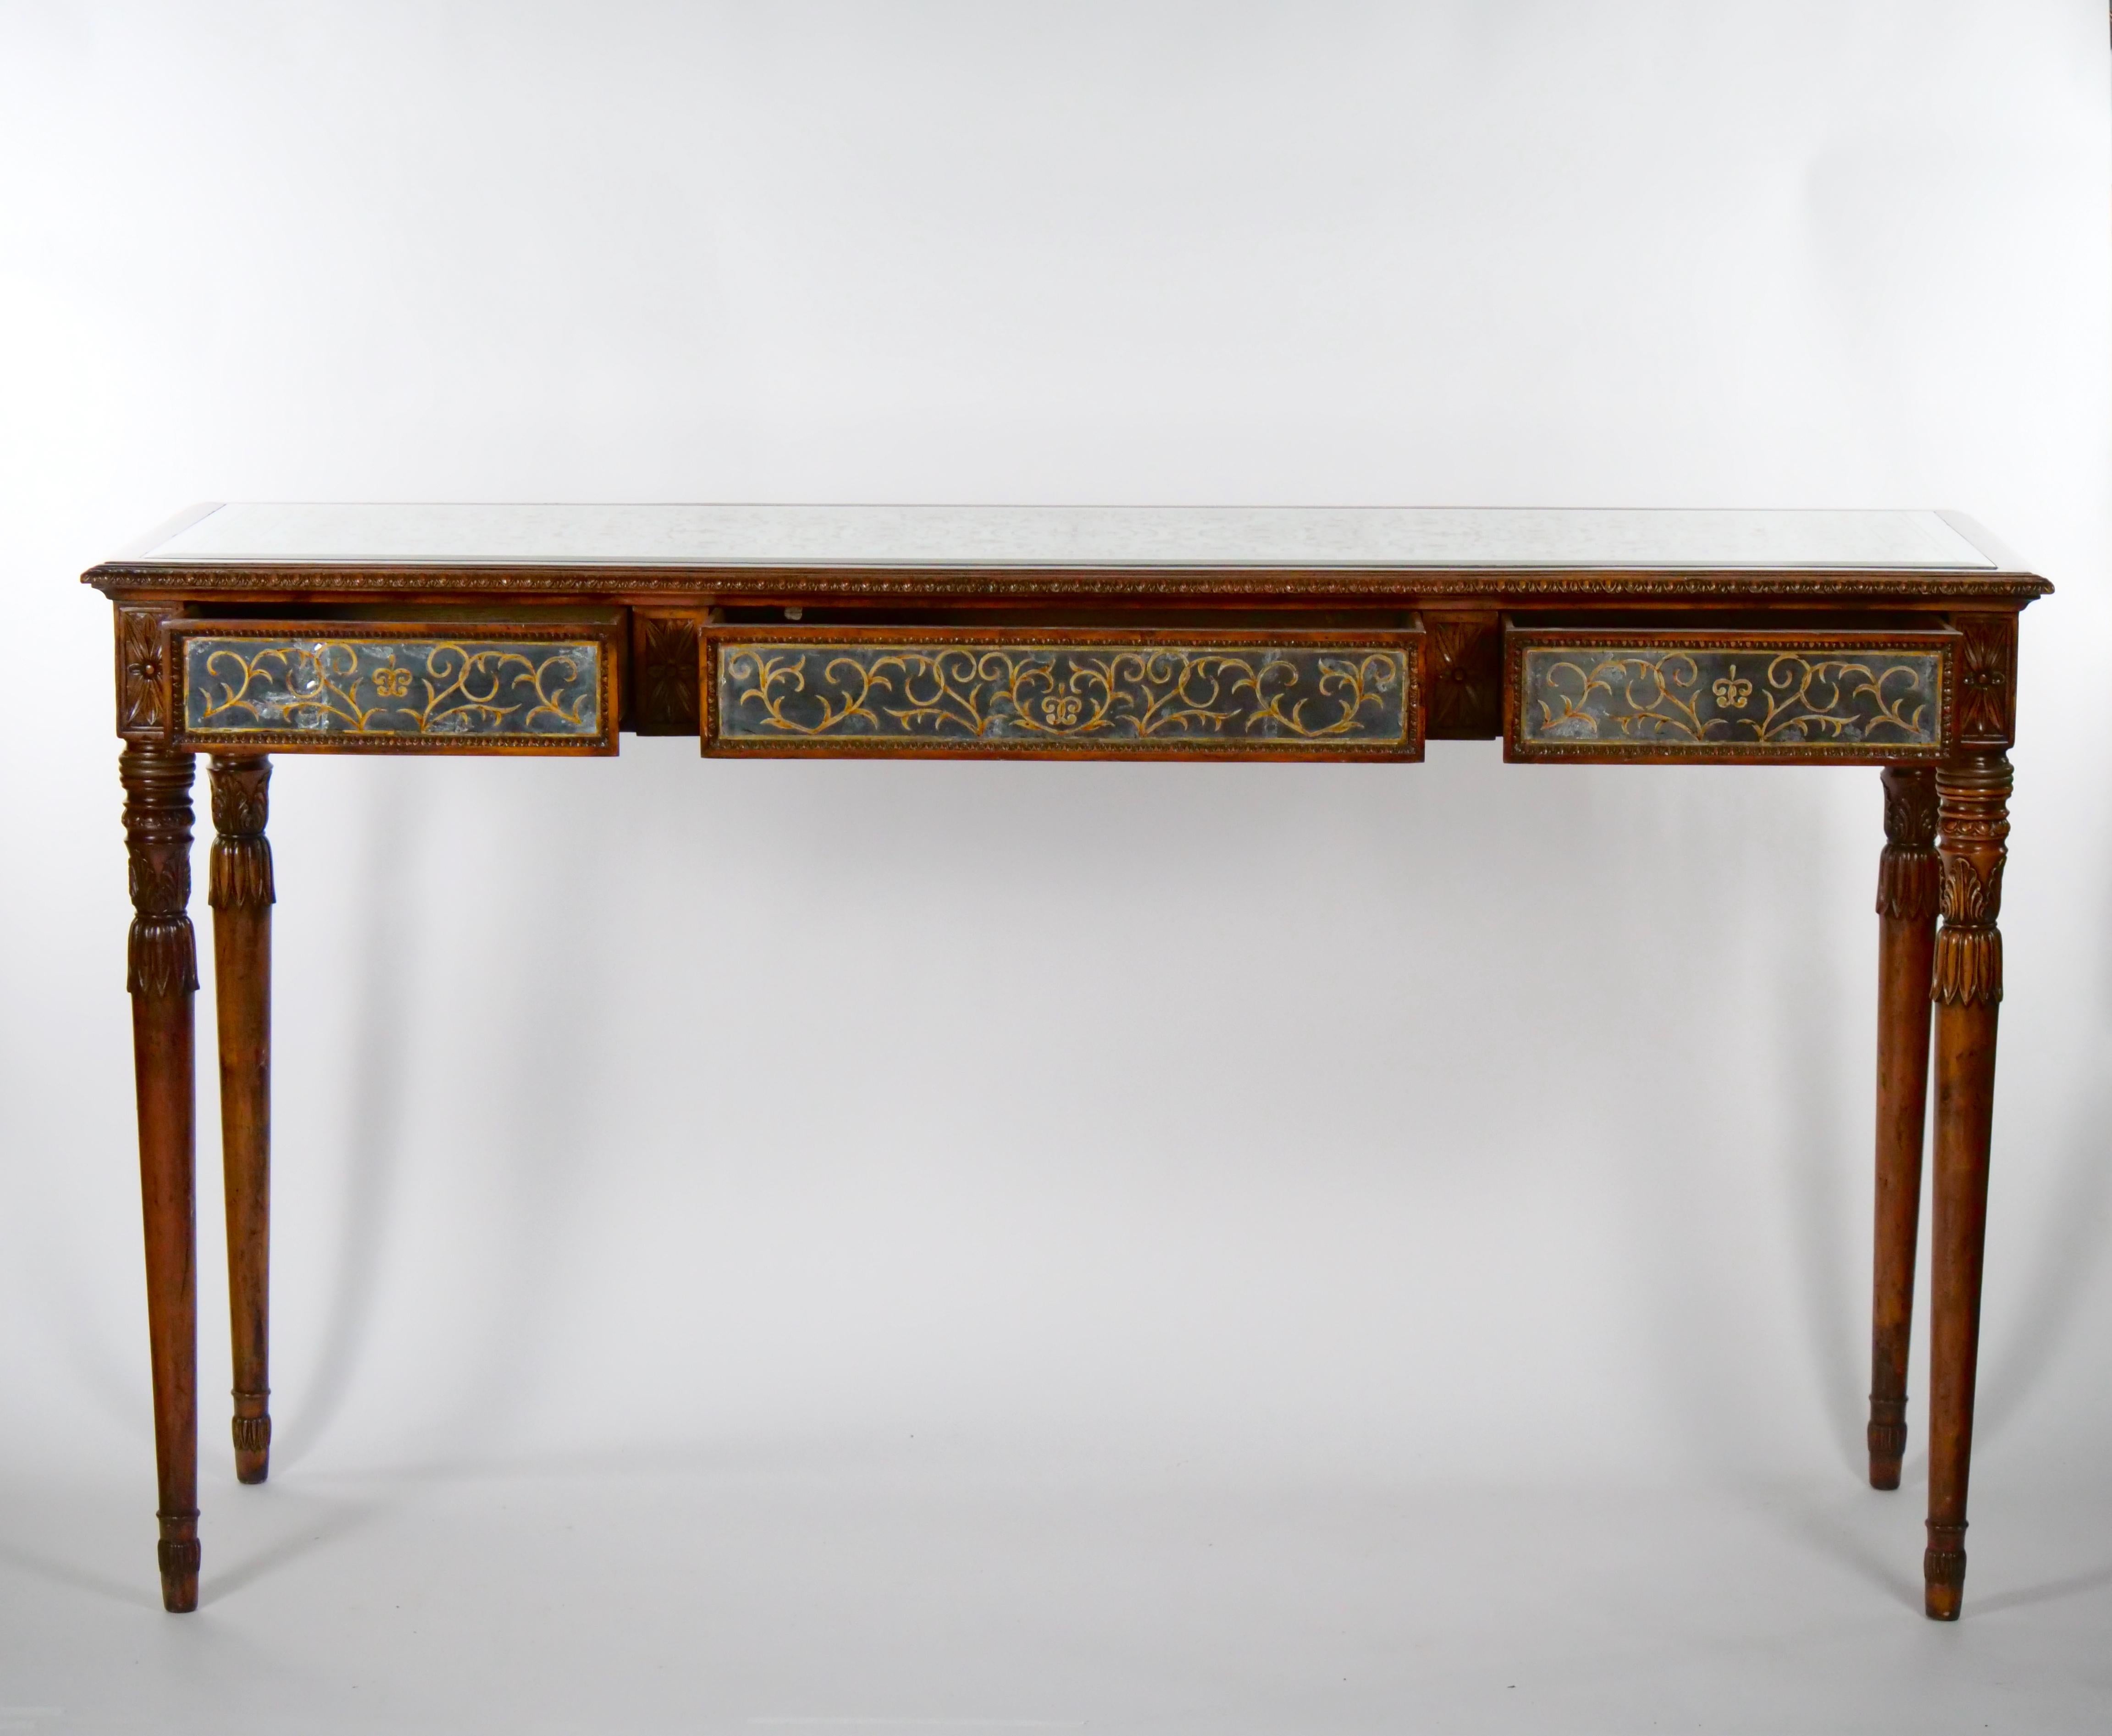 Beautifully hand carved mahogany wood framed hand etched decoration mirrored console / sofa table. The console table features an hand etched mirrored top decoration , three front pull drawers resting on four hand carved fluted legs. The table is